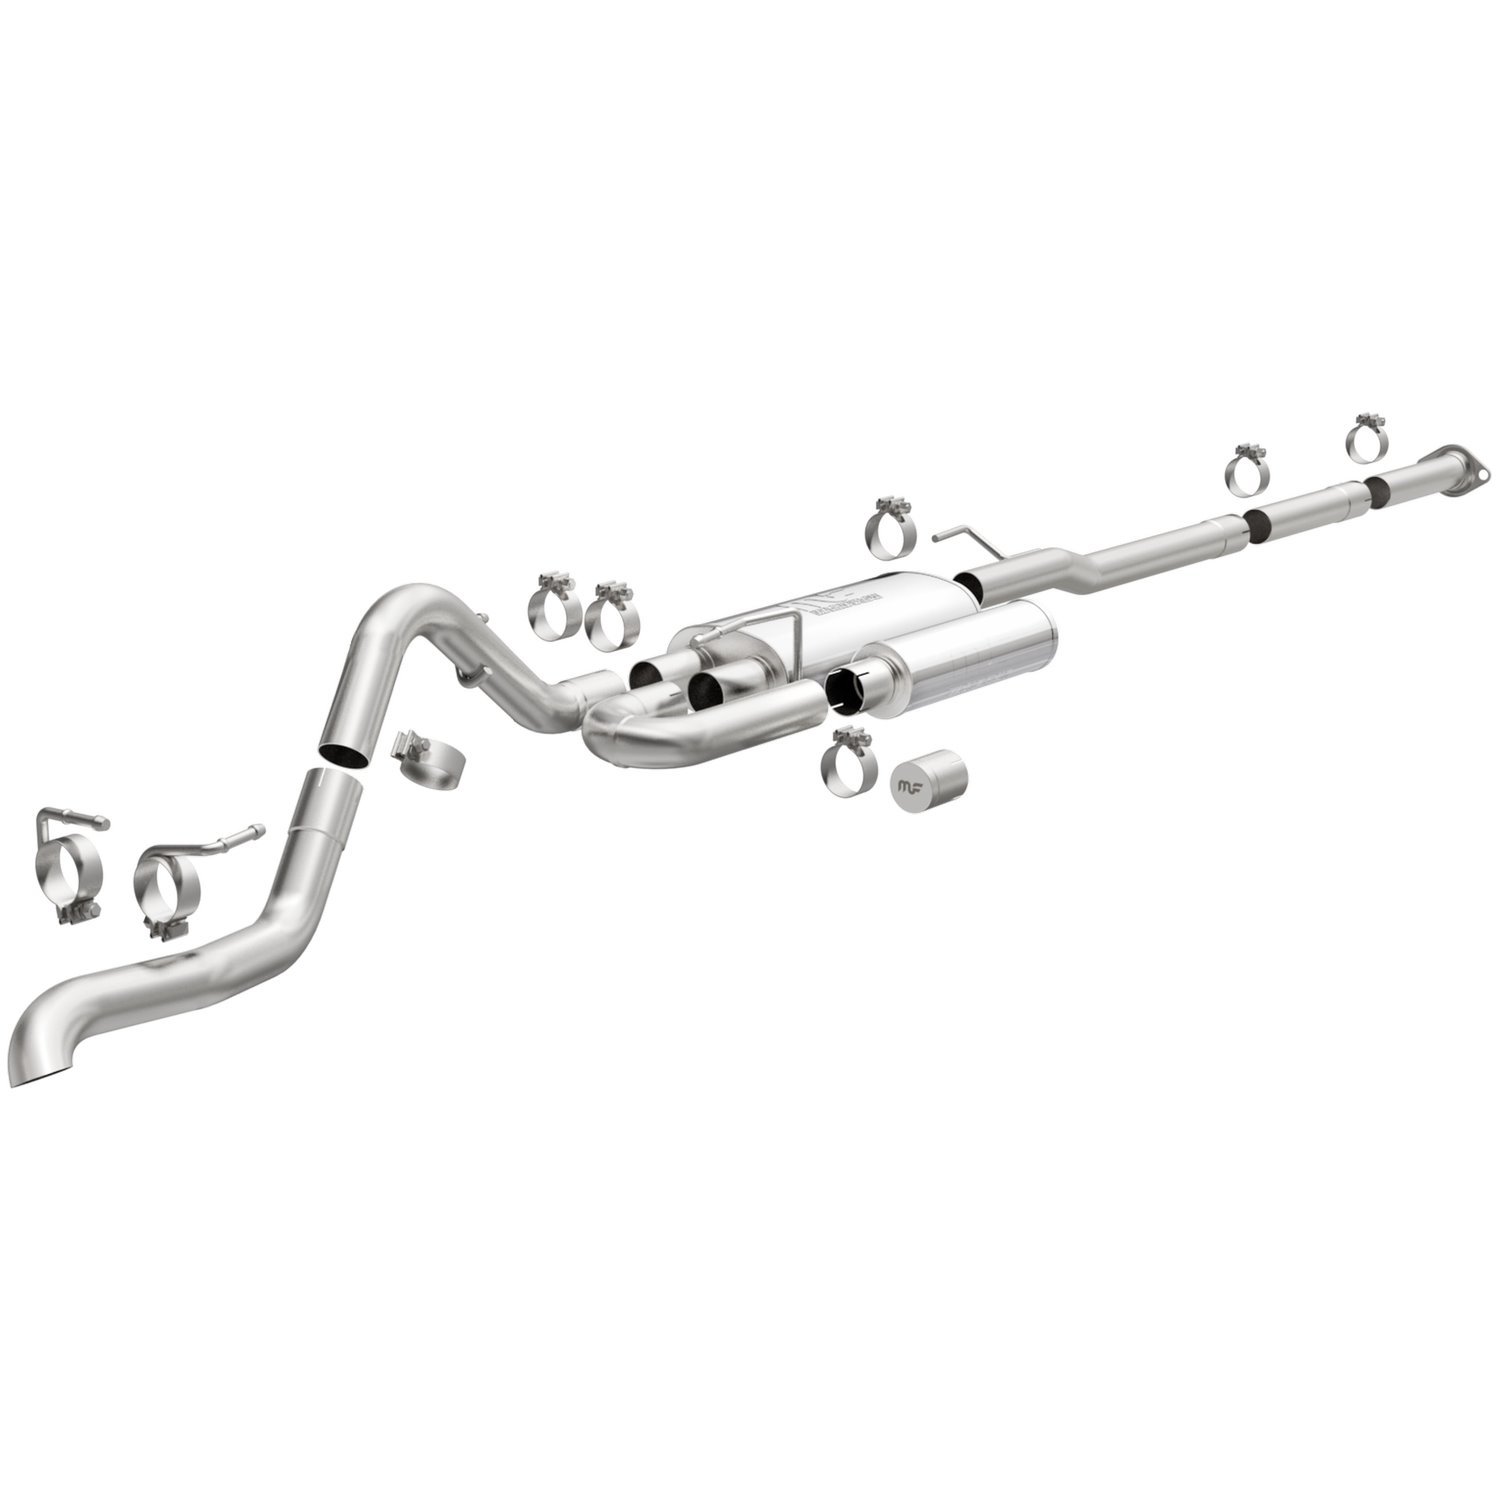 19585 Overland Series Cat-Back Exhaust System fits 2005-2015 Toyota Tacoma 4.0L V6